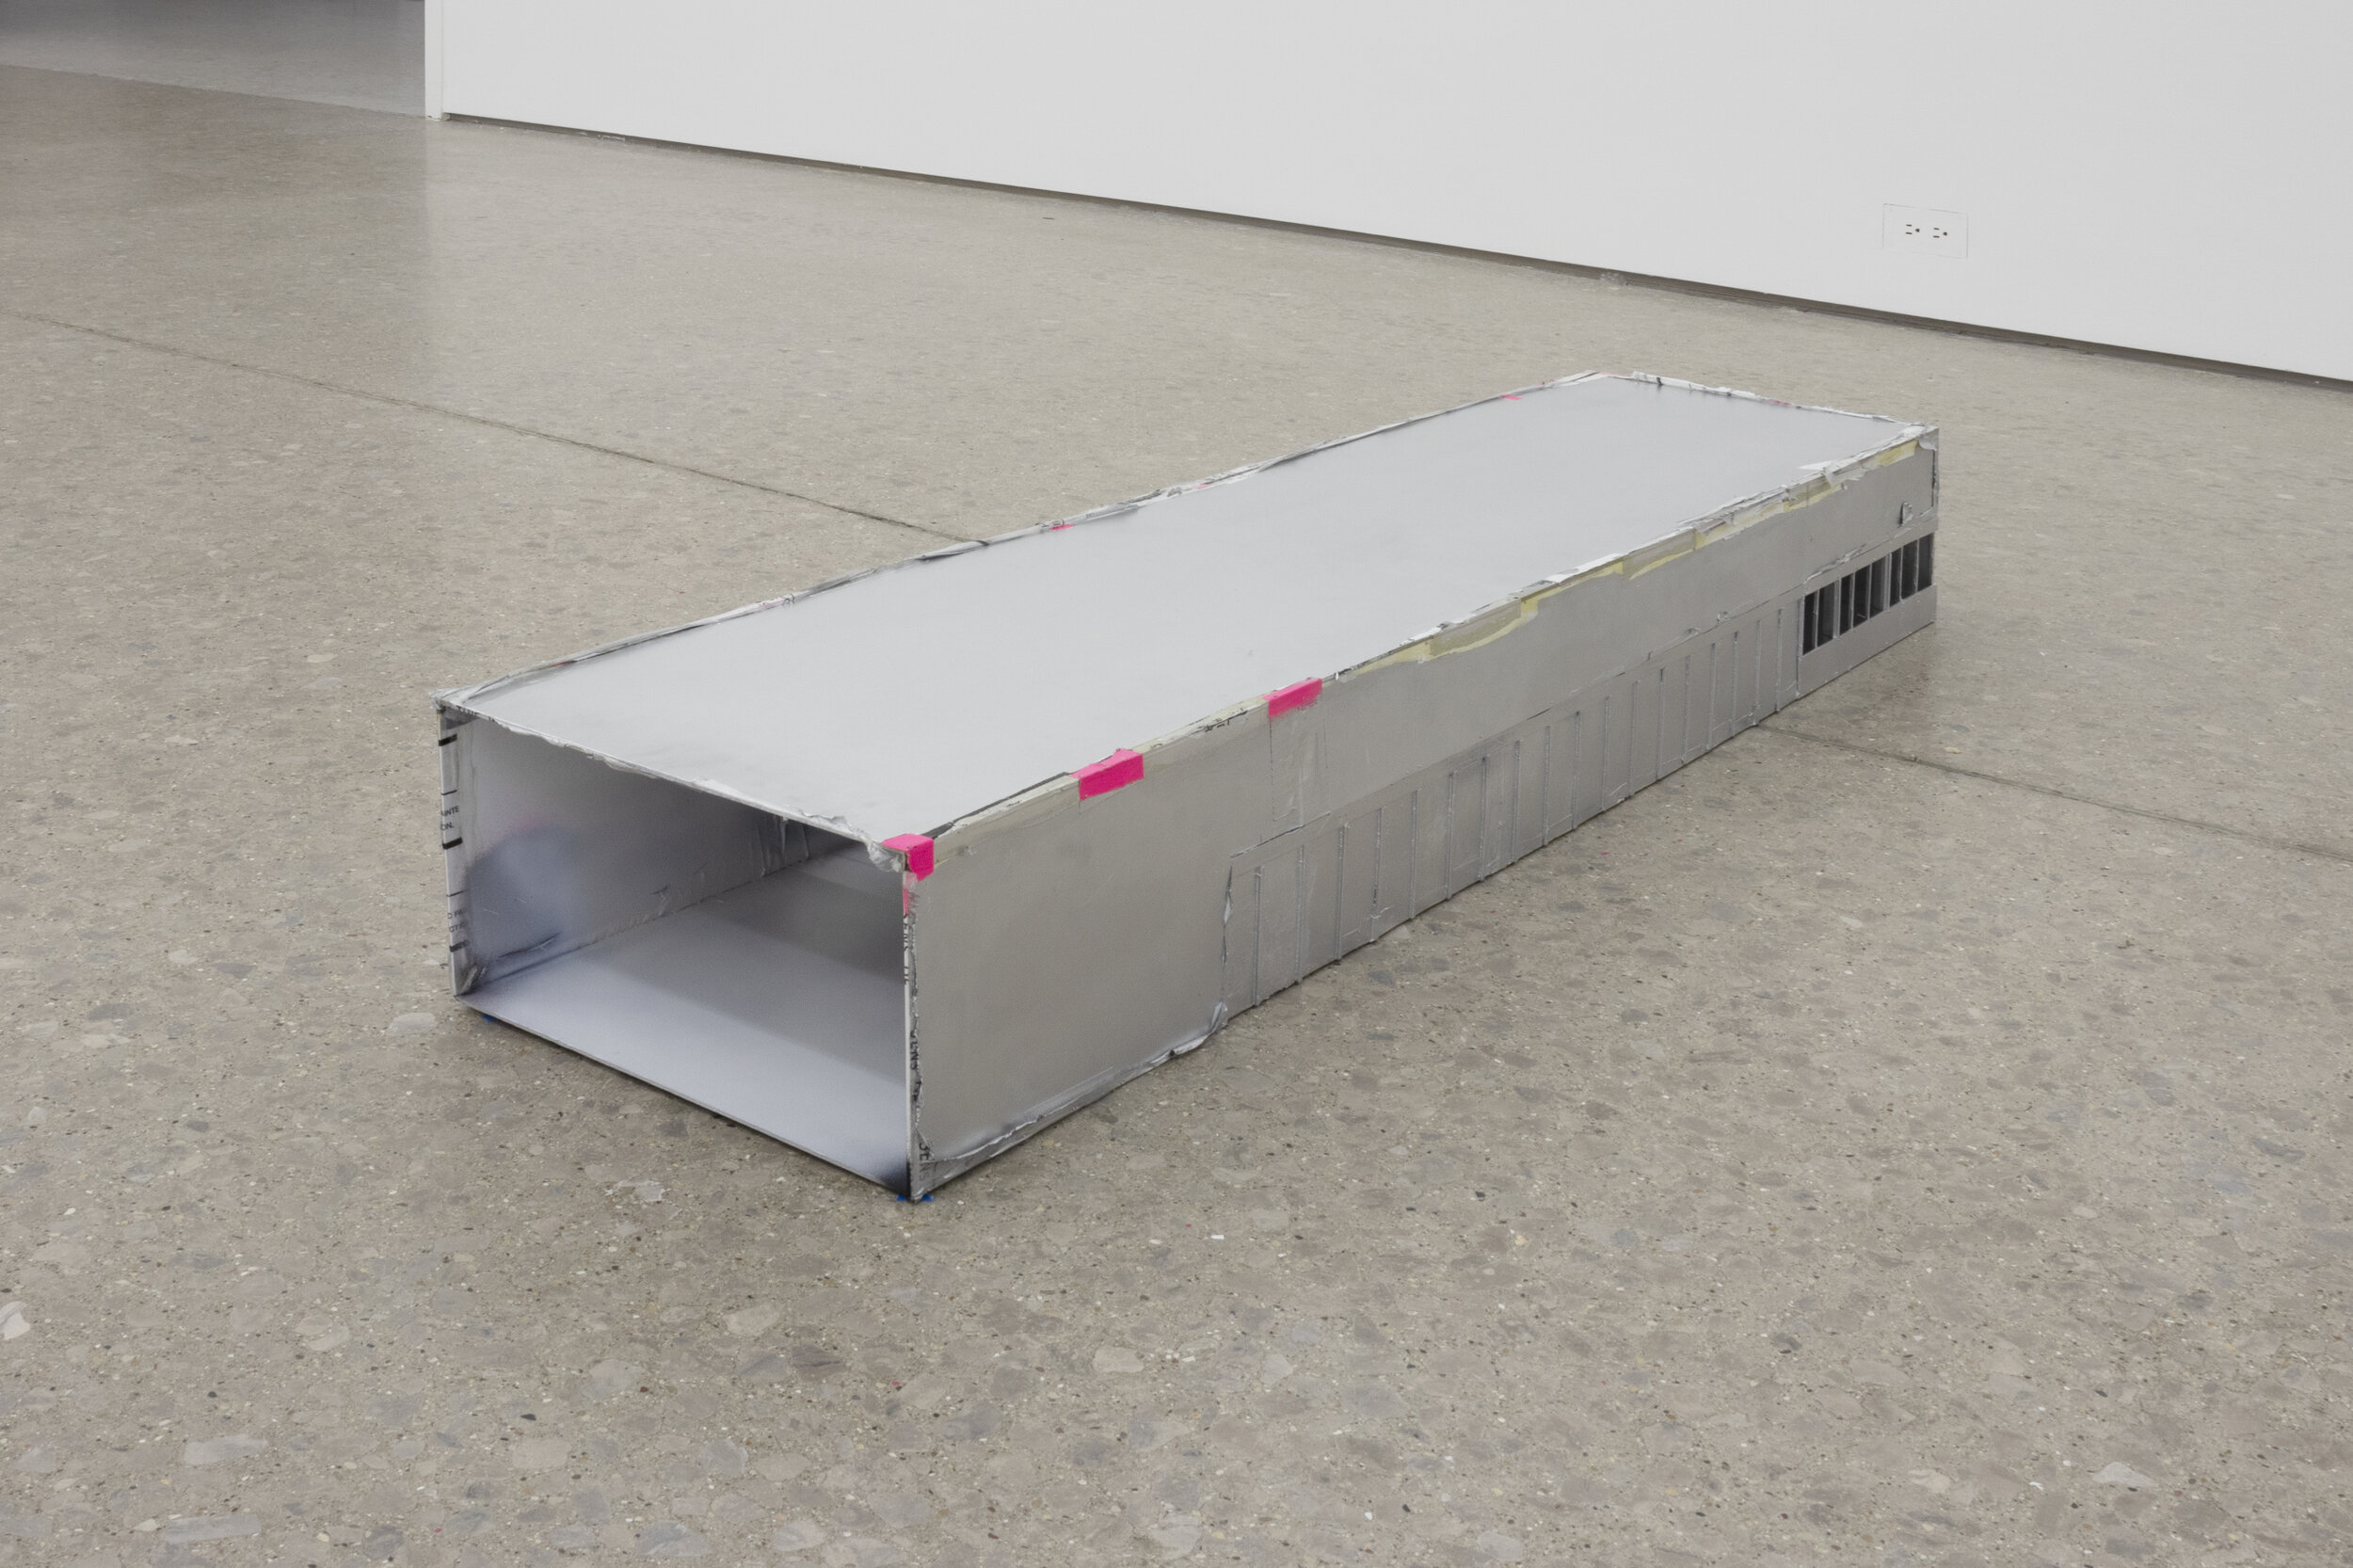   Bailey Connolly    Untitled (Ethical Configuration 02) , 2021   expanded PVC, sequin pins, aluminum flashing, protection plastic, spray paint, acrylic paint, aluminum tape, duct tape, contact cement, marker   7.25 x 12.25 x 48 in                   